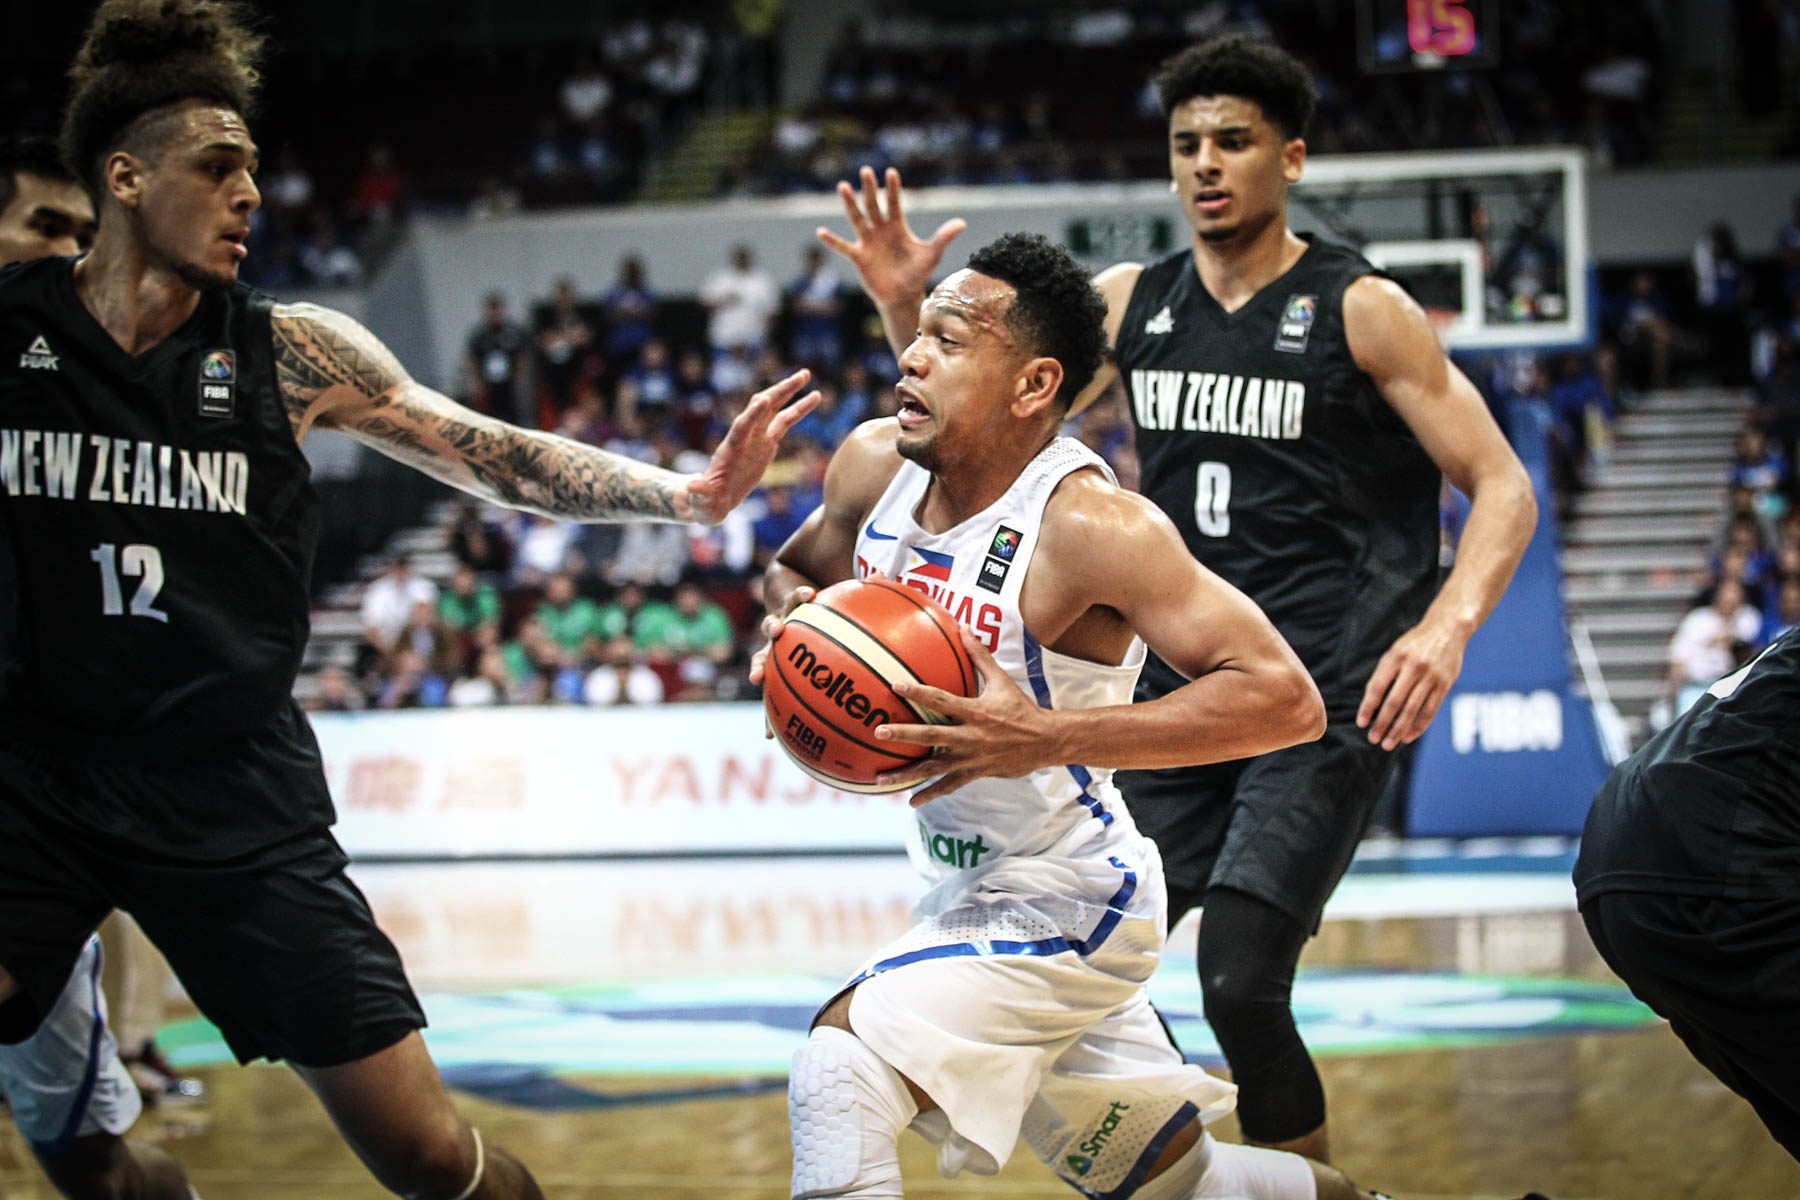 Gilas falls to New Zealand, gets eliminated in front of home crowd